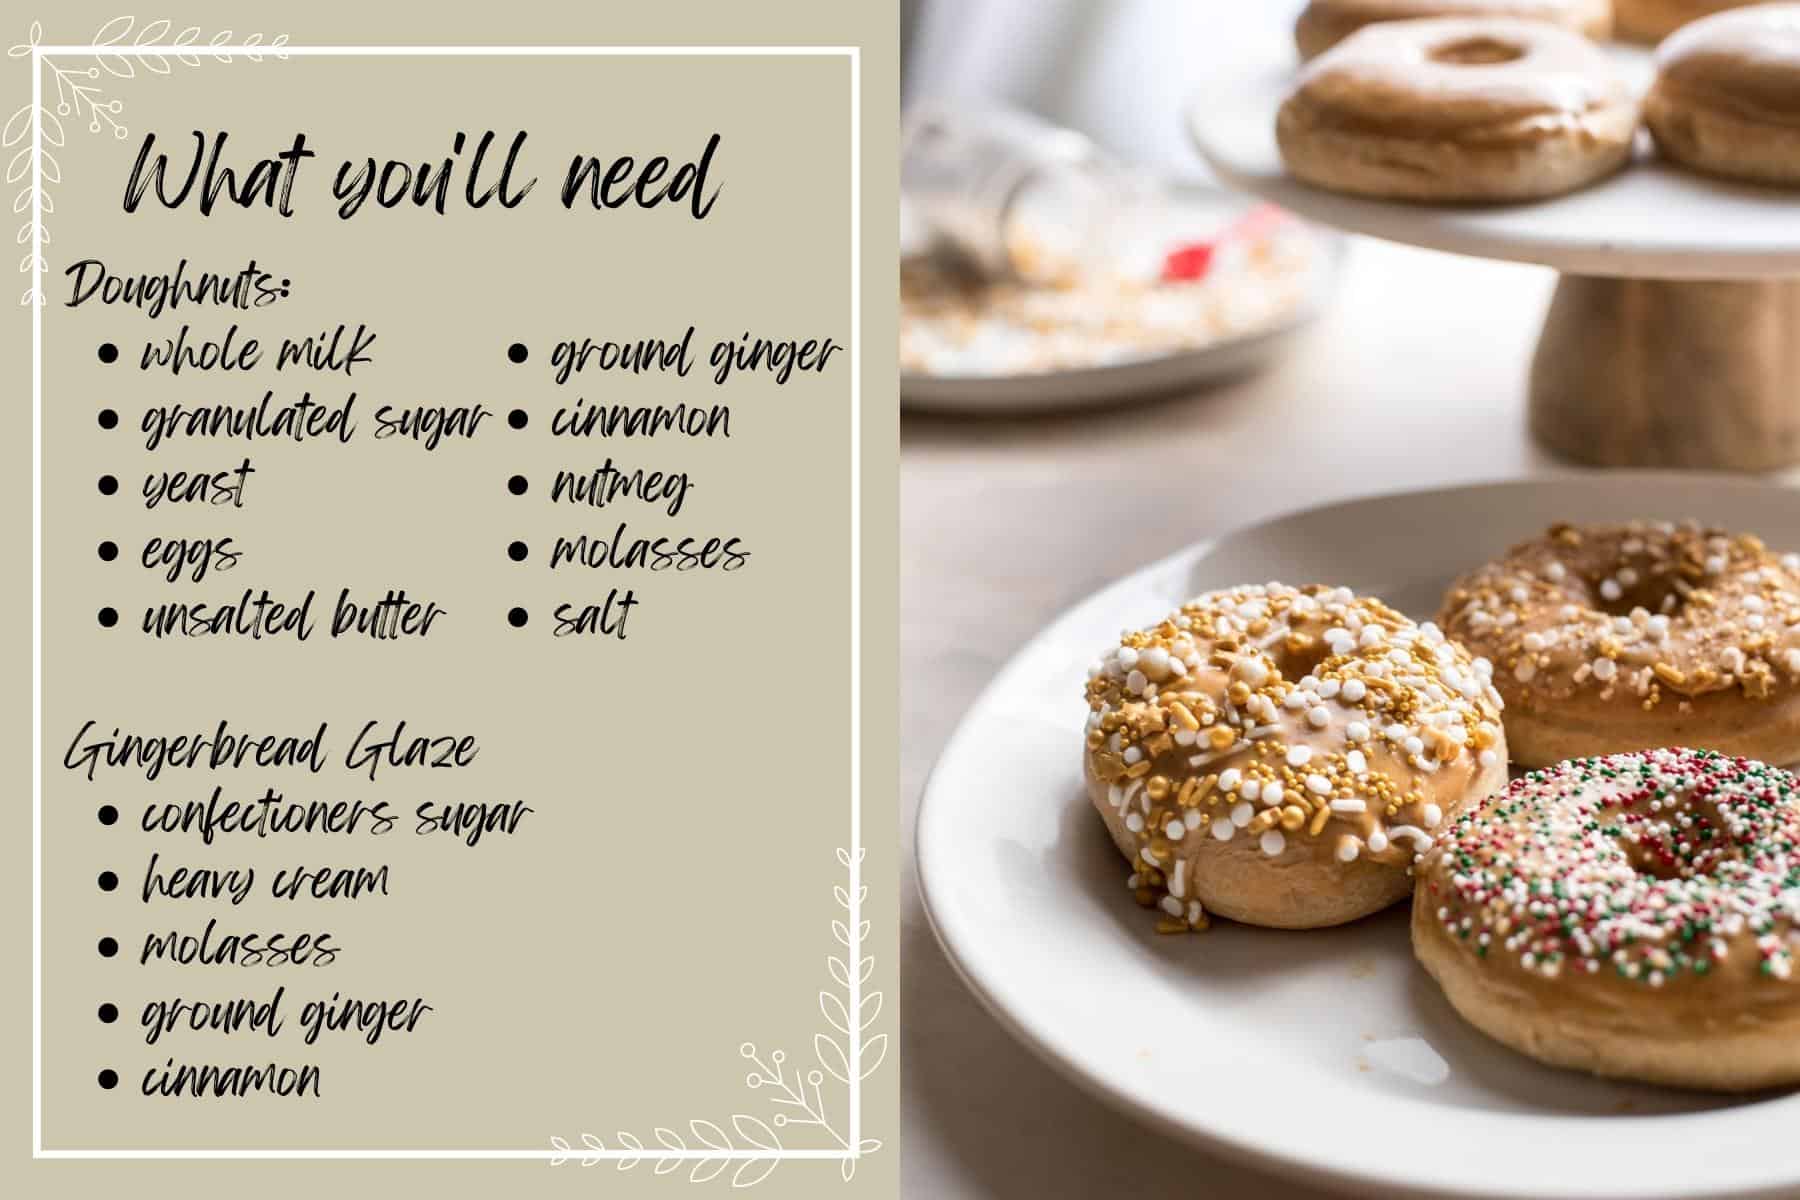 On the left hand side is a list of ingredients required to make this recipe, on a cream/khaki background with a white frame. To the right there is an image with 3 gingerbread doughnuts topped with various sprinkles on a white plate. Behind that is a cake stand holding more doughnuts. 